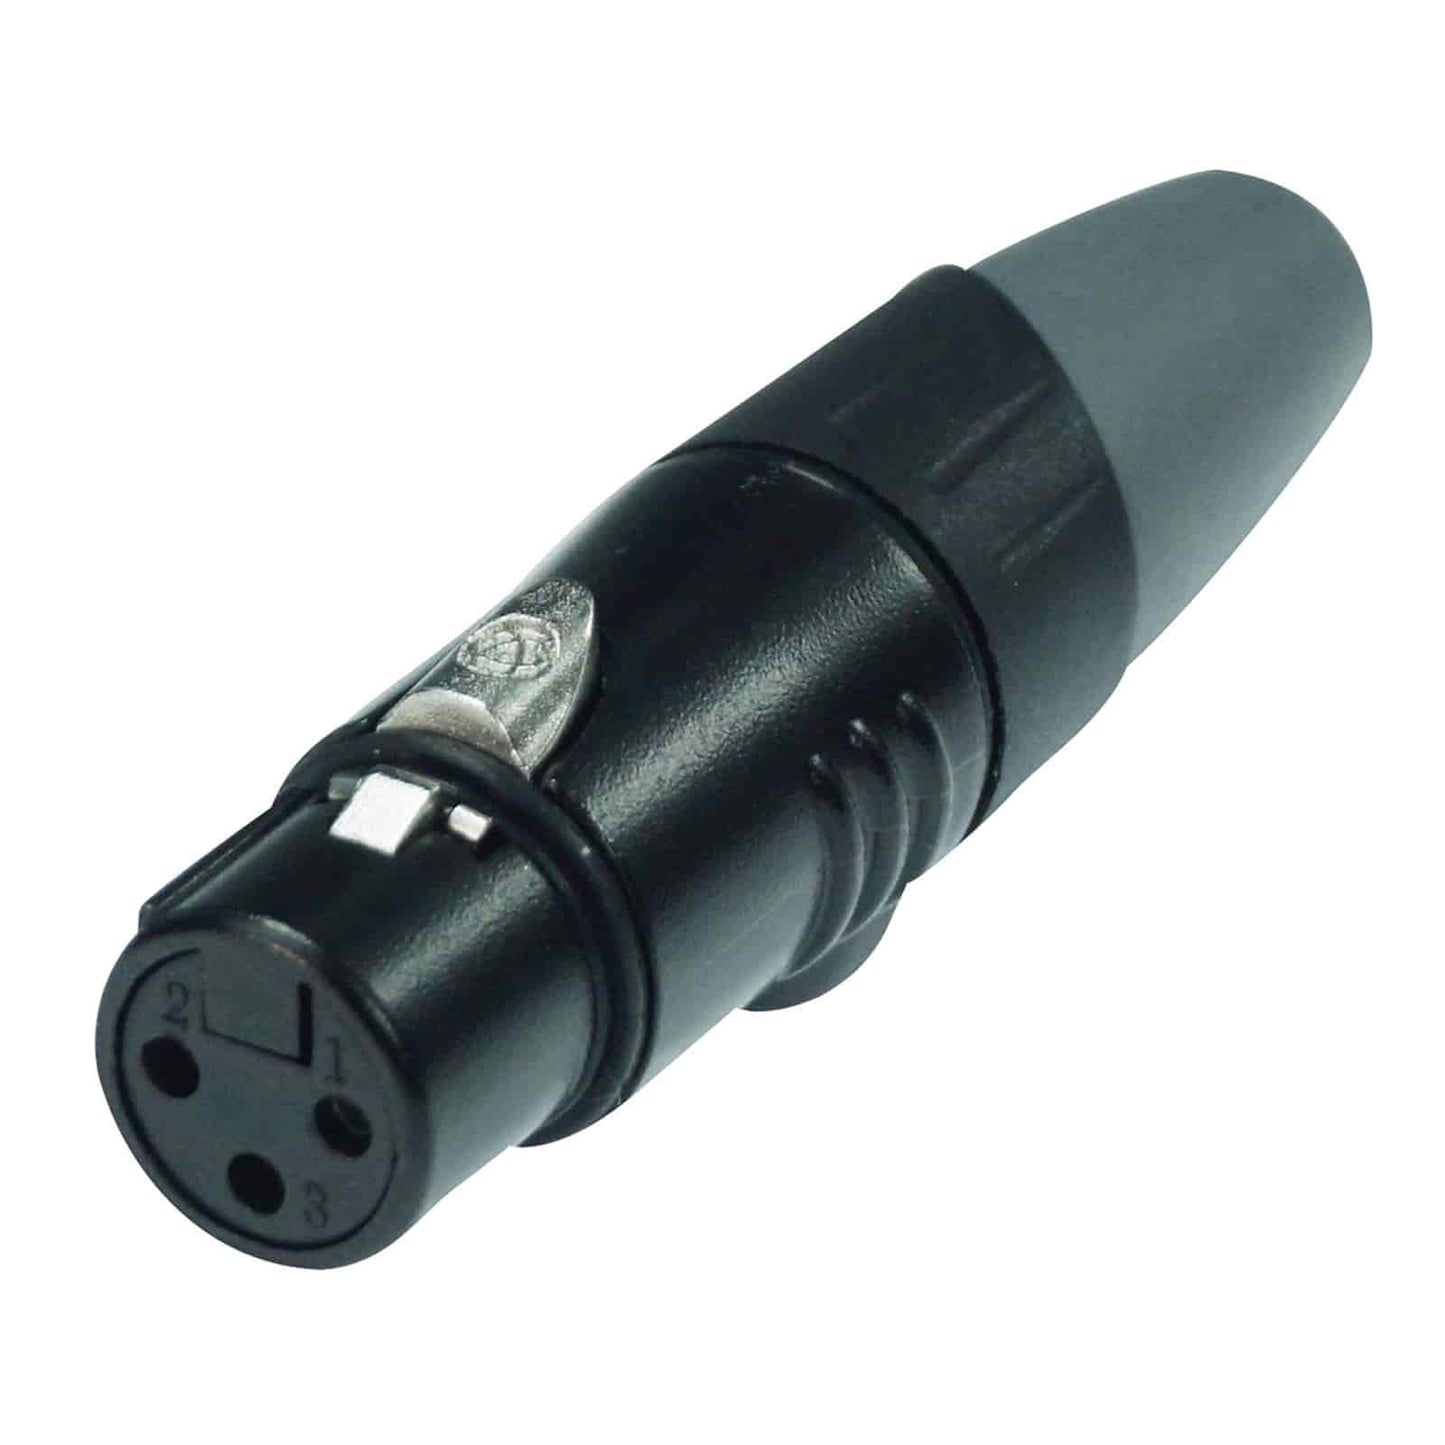 Enova XLR Cable Connector Female 3-Pin Black Housing and Grey Boot Solder Cups